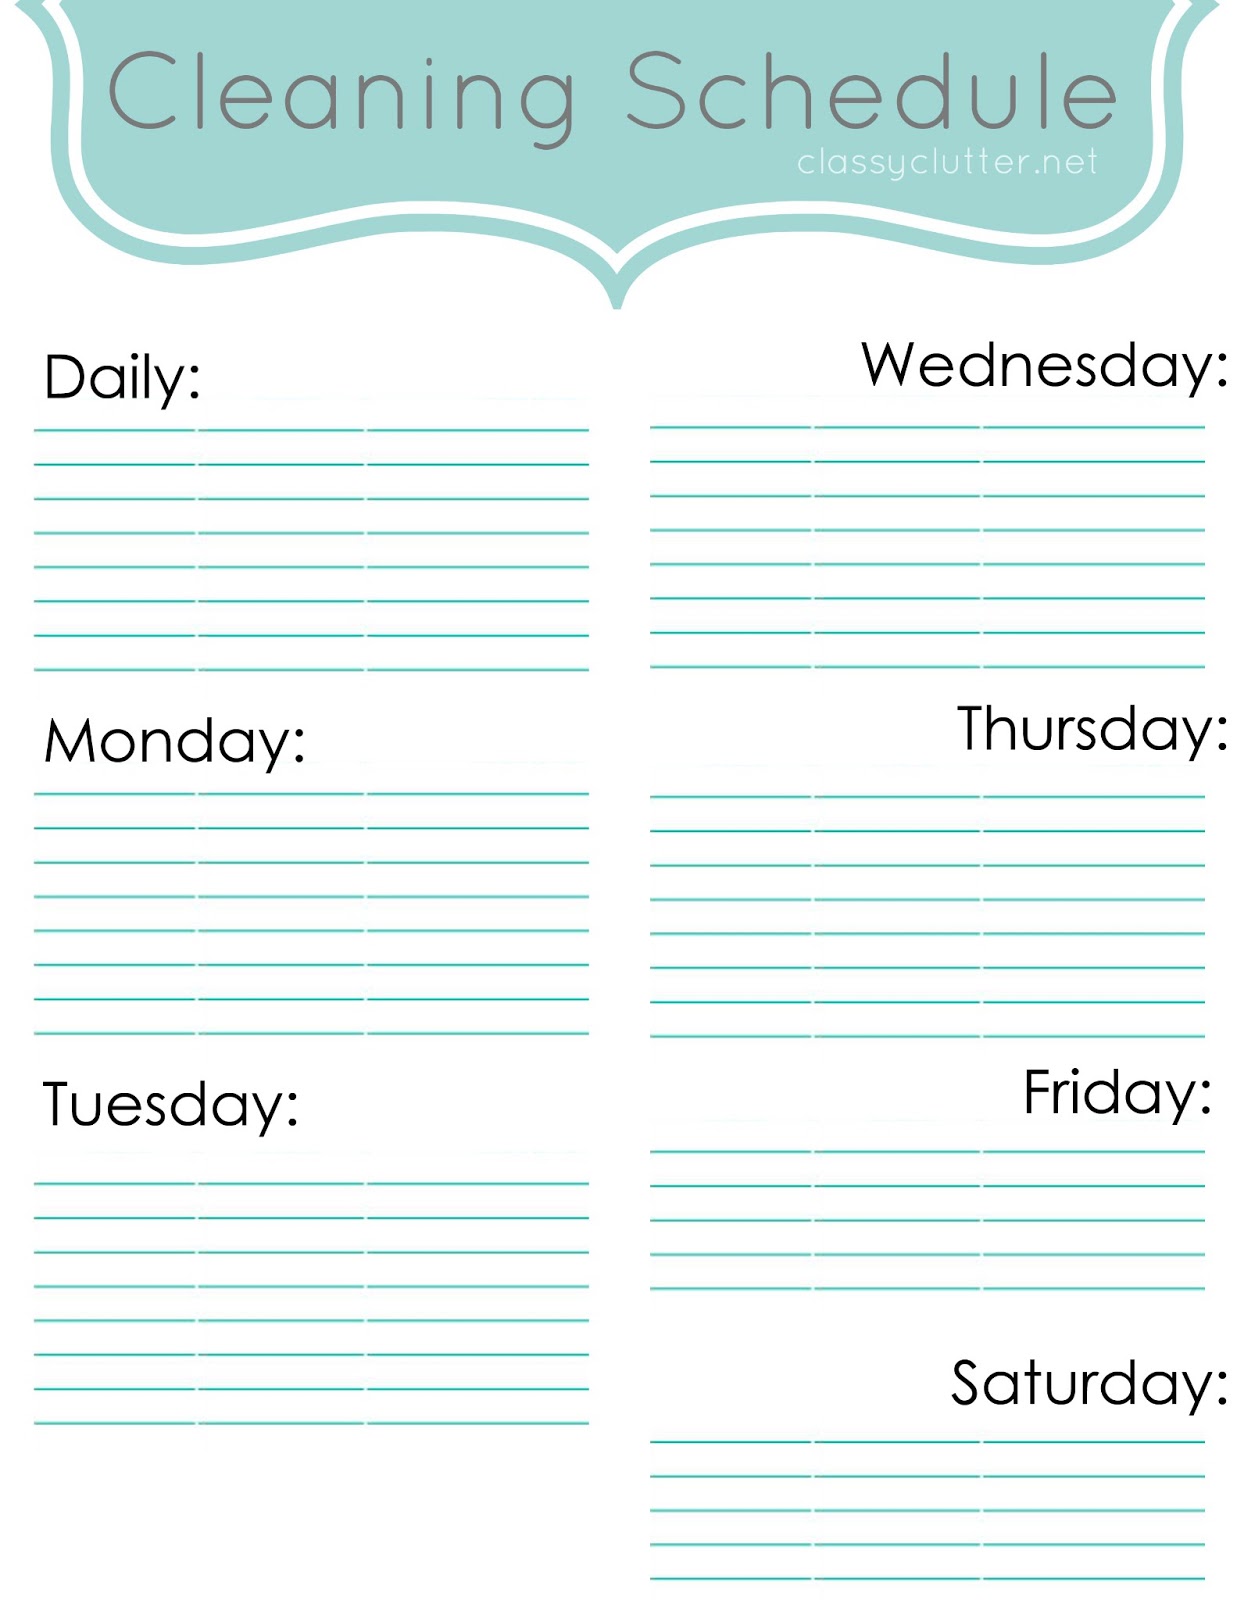 Weekly Cleaning Schedule: Improve Your Cleaning Habits   Classy 